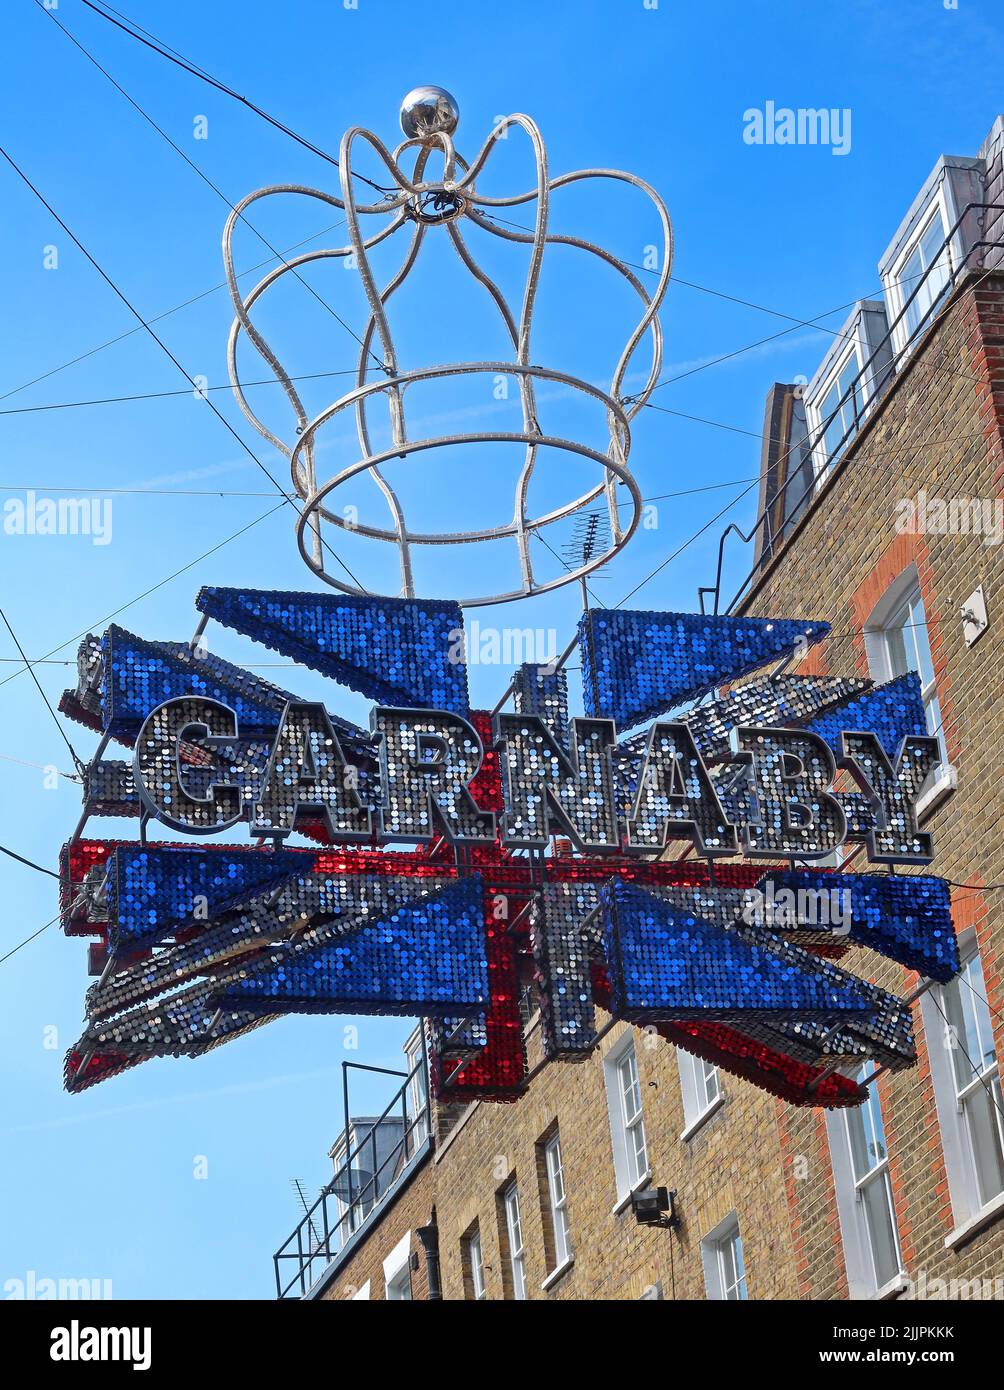 Crown and British union flag in the famous Carnaby Street, Soho, London, England, UK, W1F 9PS Stock Photo